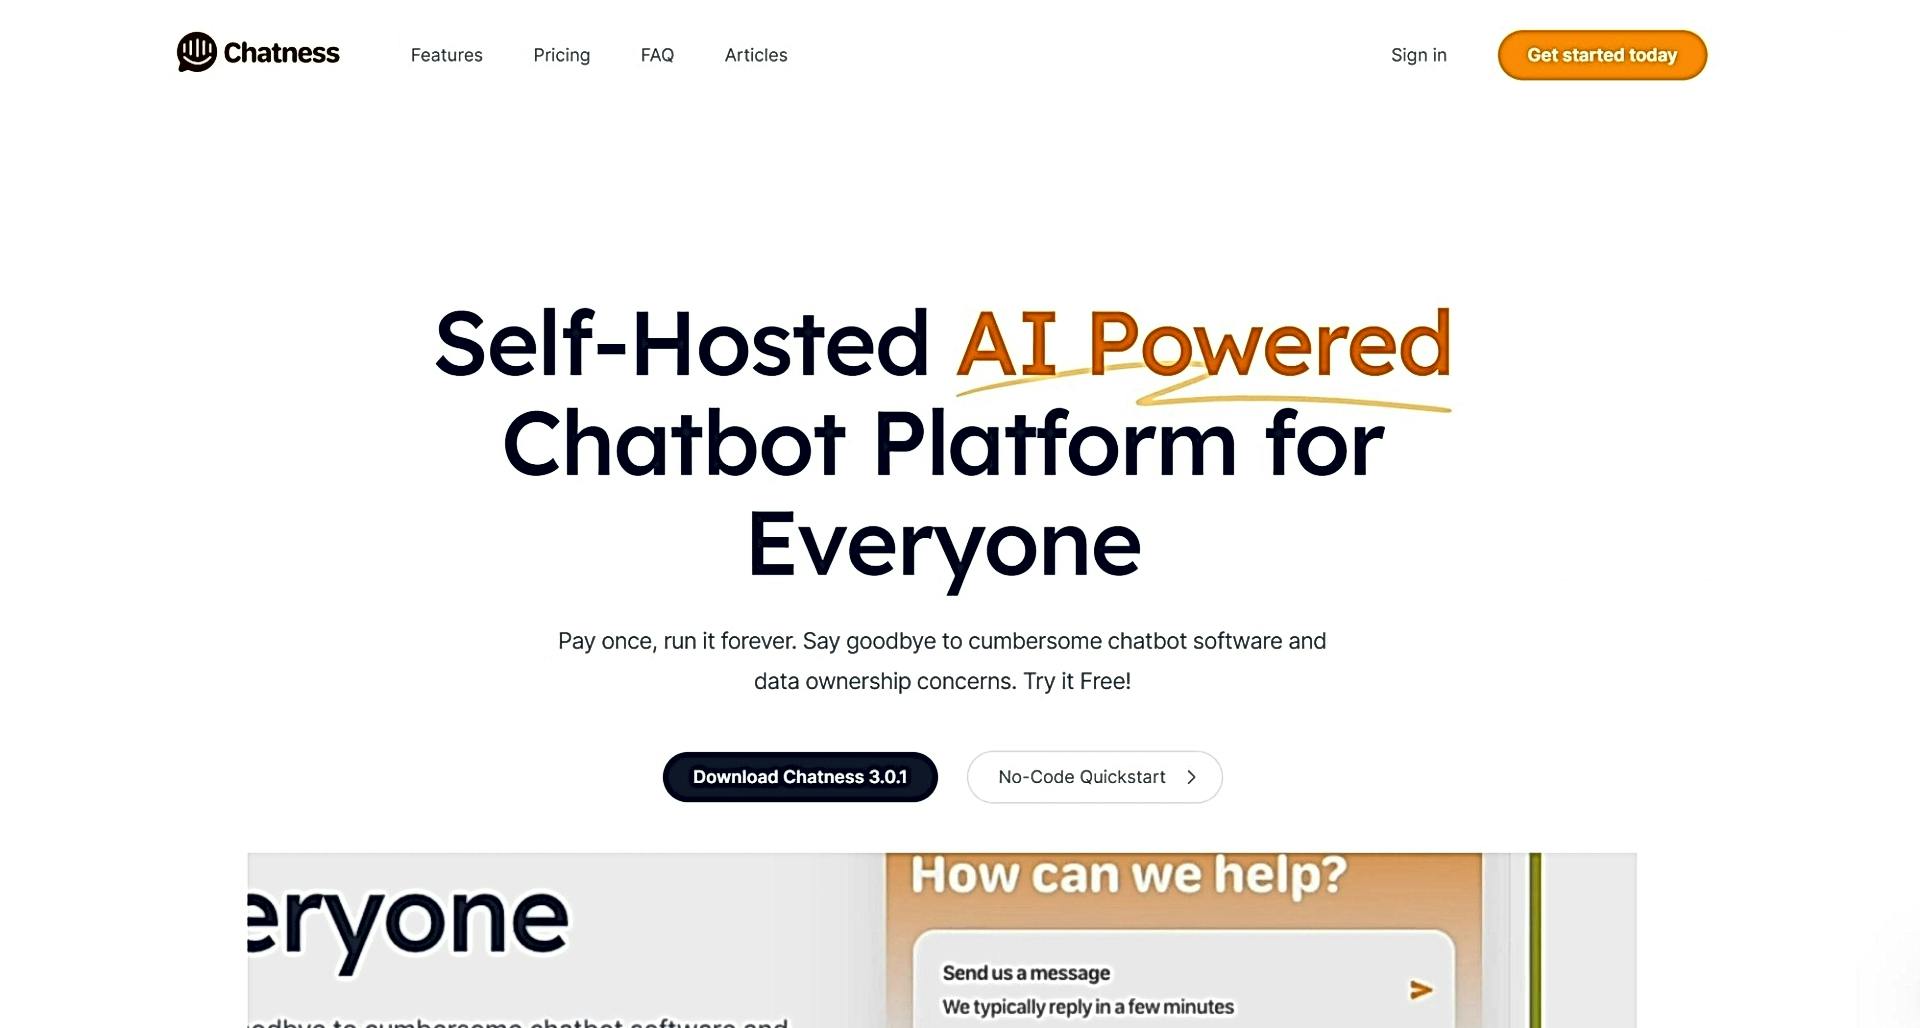 Chatness featured